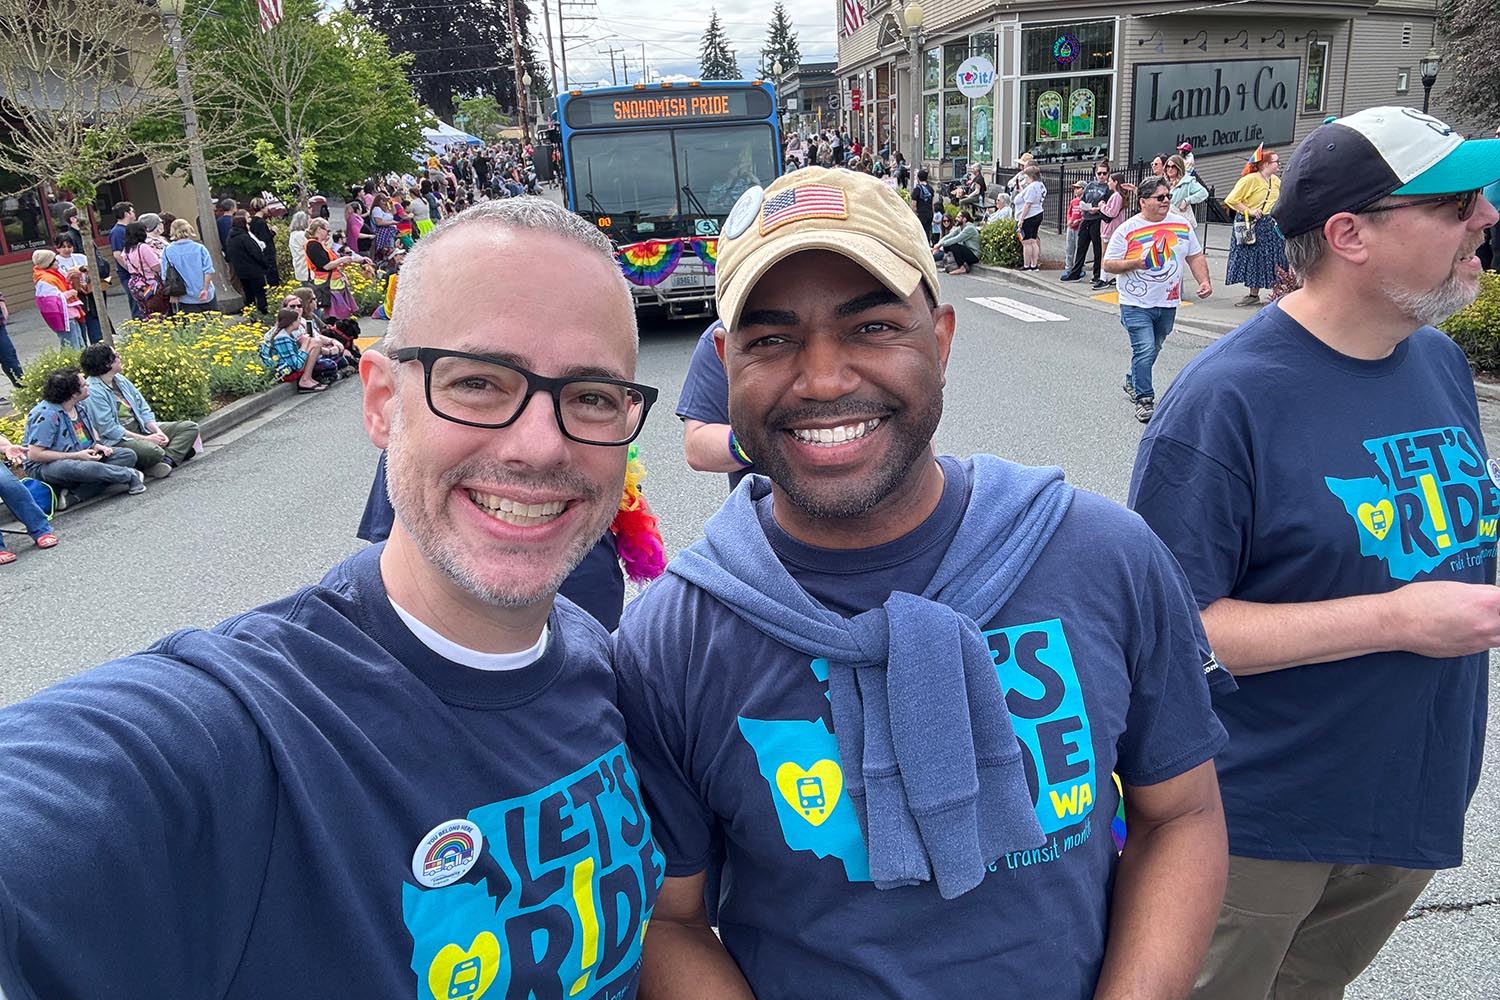 Phillip & Lance smile at the Snohomish Pride celebration. A Community Transit bus decked out with rainbow bunting is shown in the background.